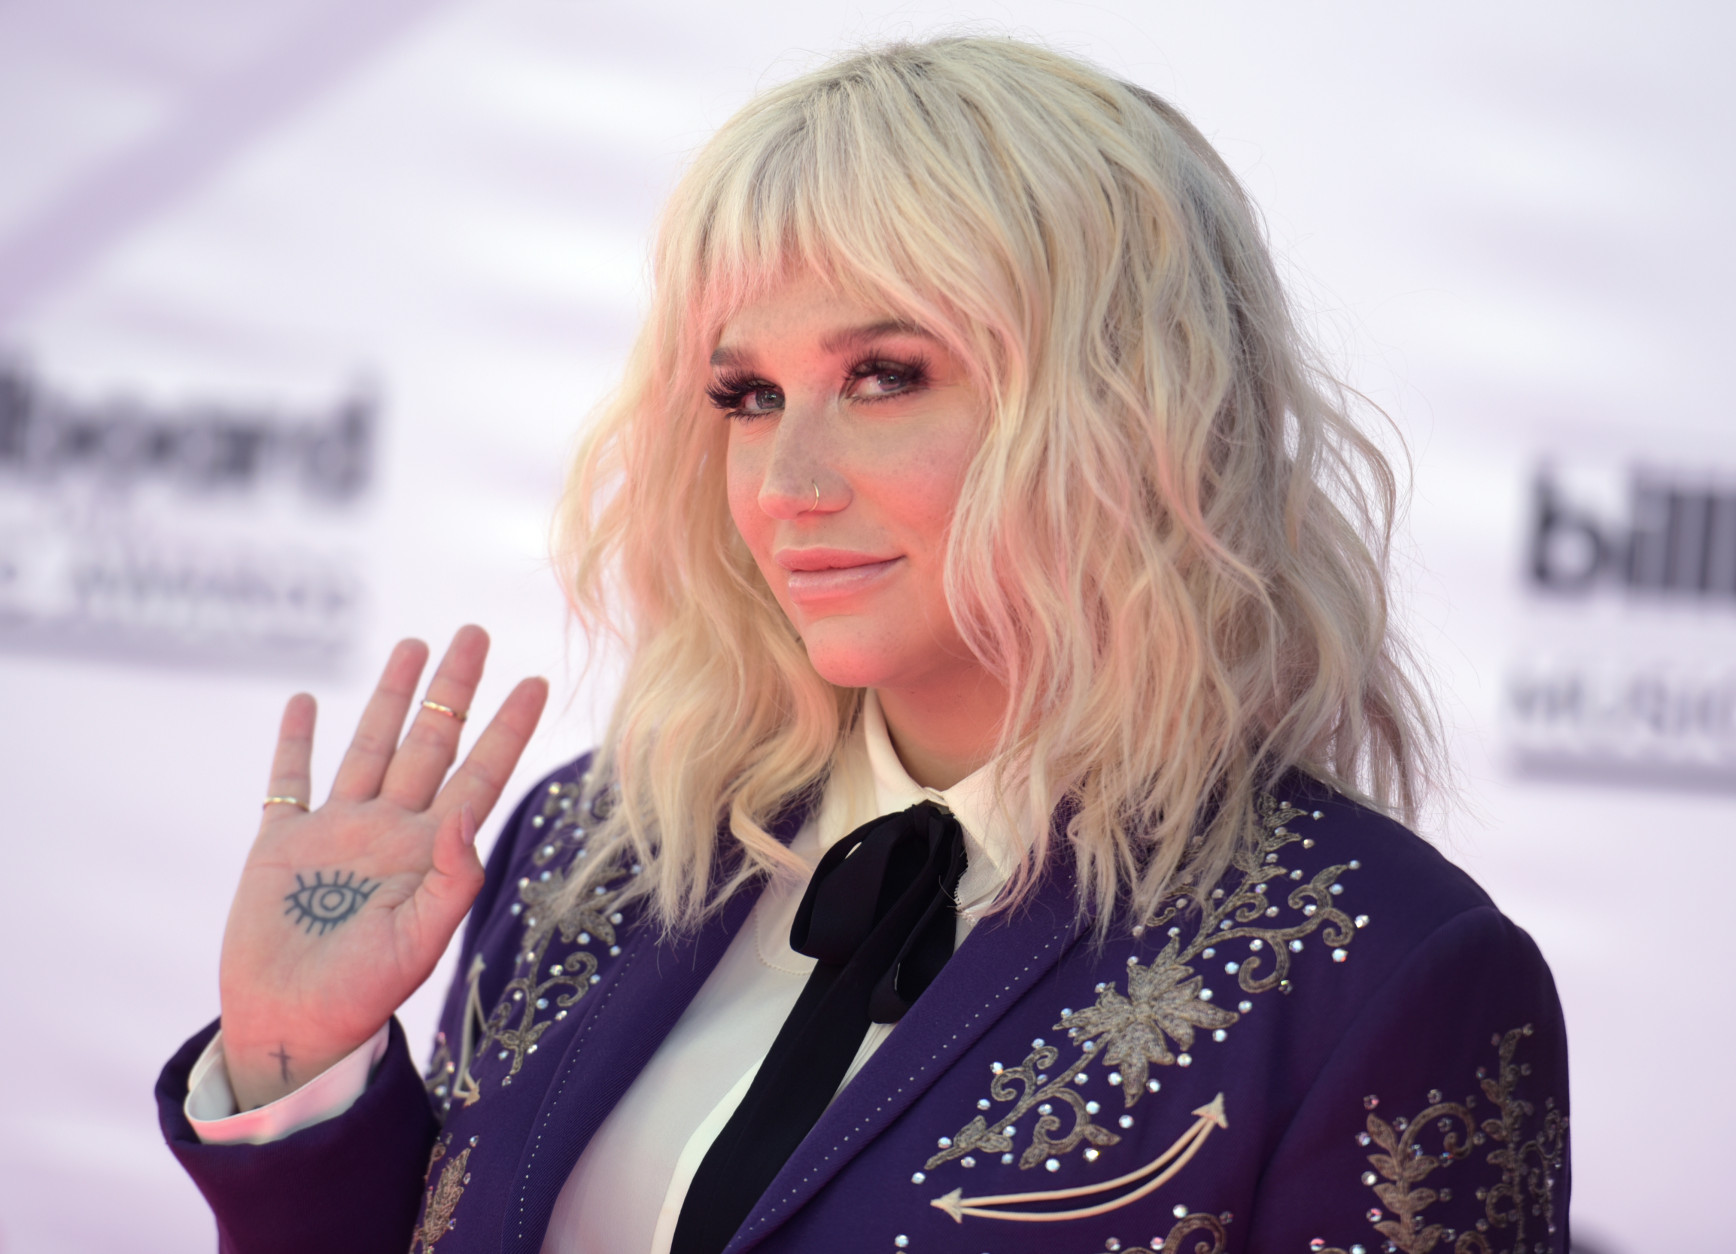 Kesha arrives at the Billboard Music Awards at the T-Mobile Arena on Sunday, May 22, 2016, in Las Vegas. (Photo by Richard Shotwell/Invision/AP)